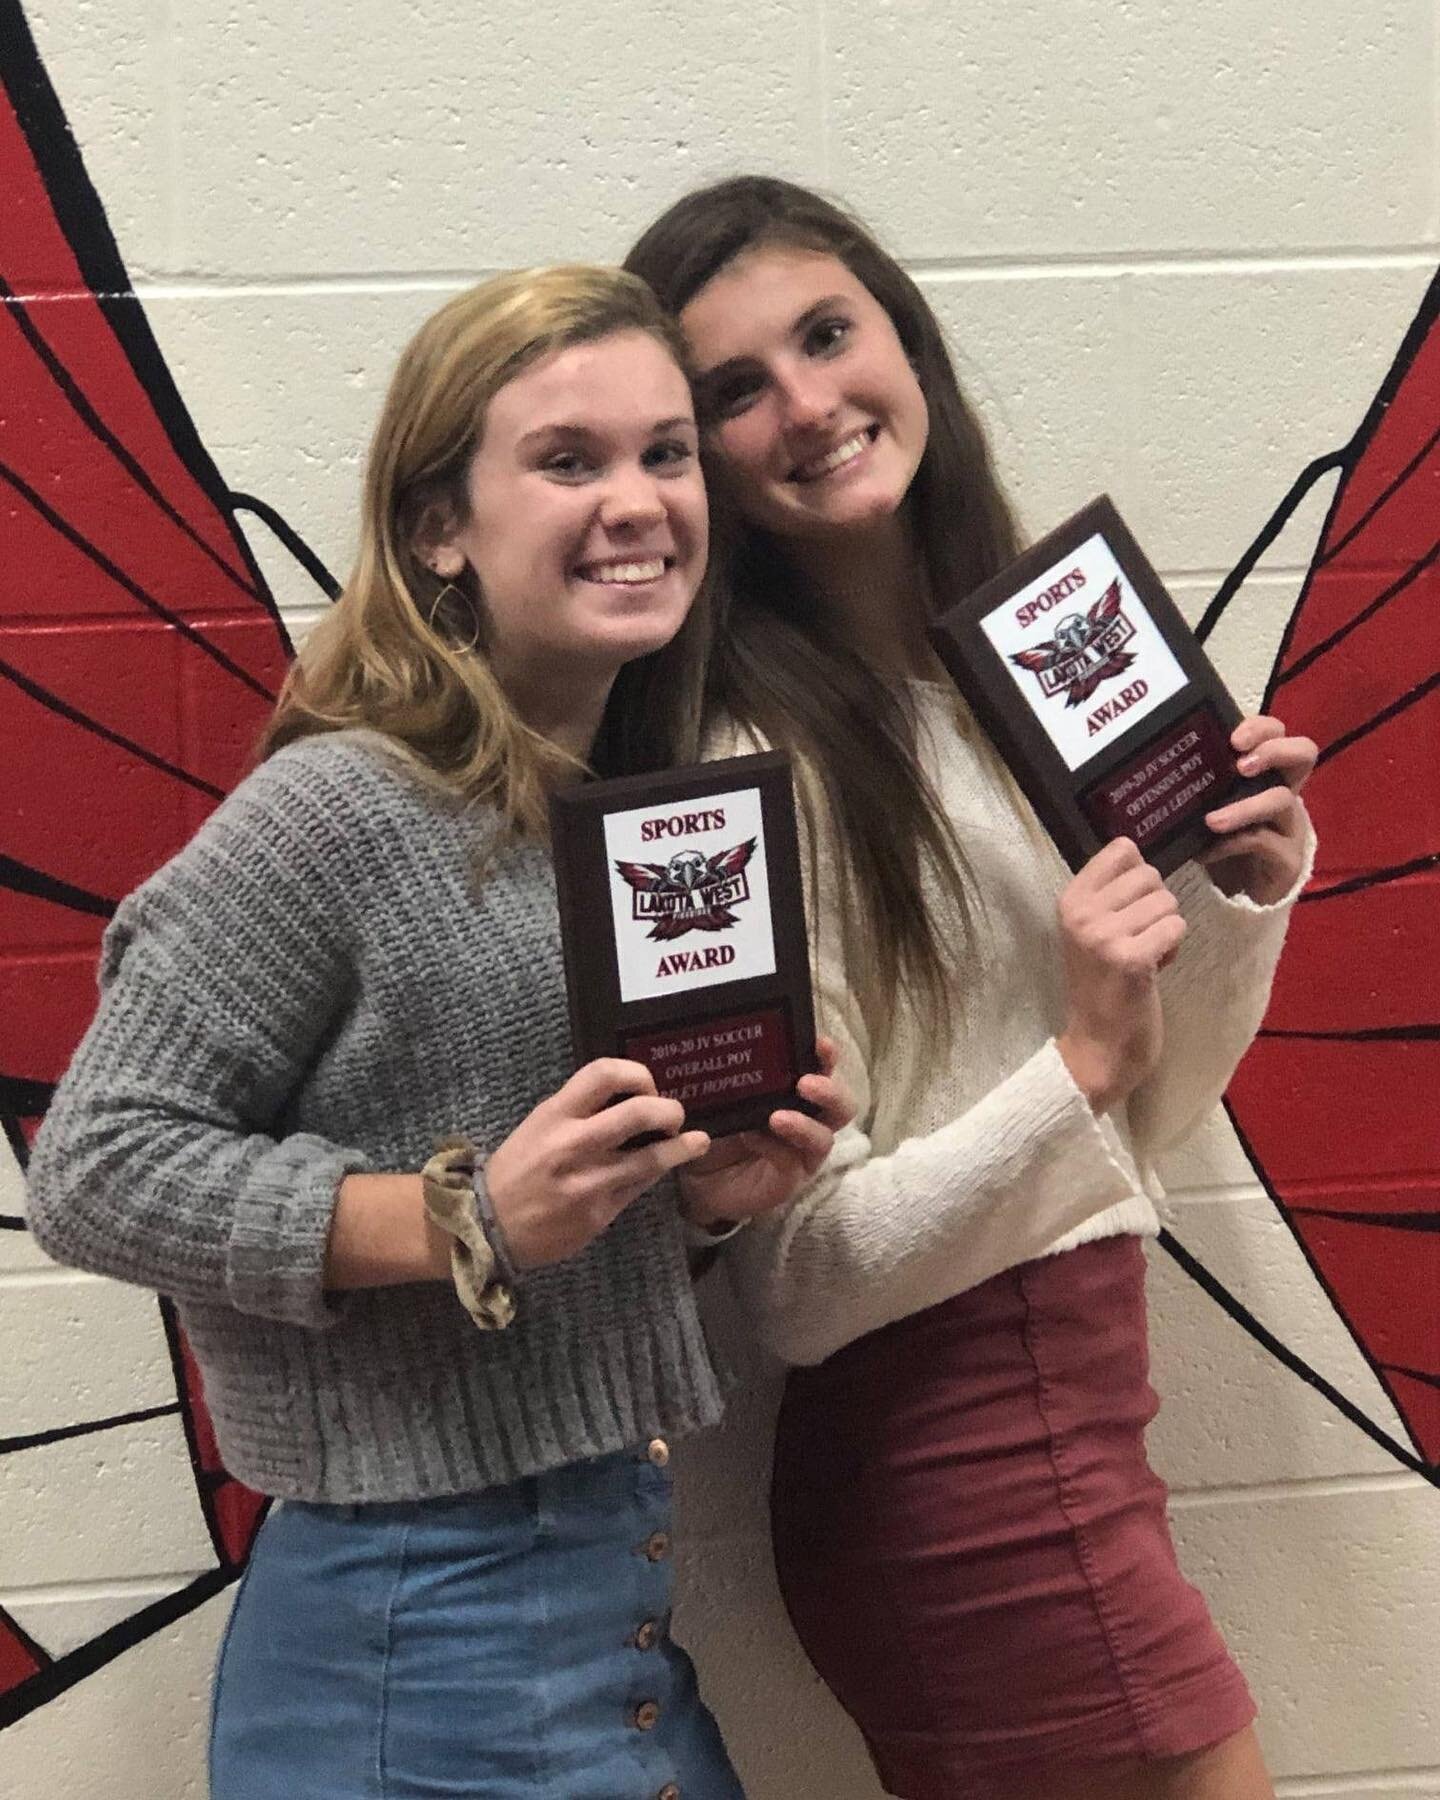 Lydia Lehman was recognized as offensive player of the year and Riley Hopkins received an award for overall player of the year for the Lakota West JV team! Congratulations girls! 🥳